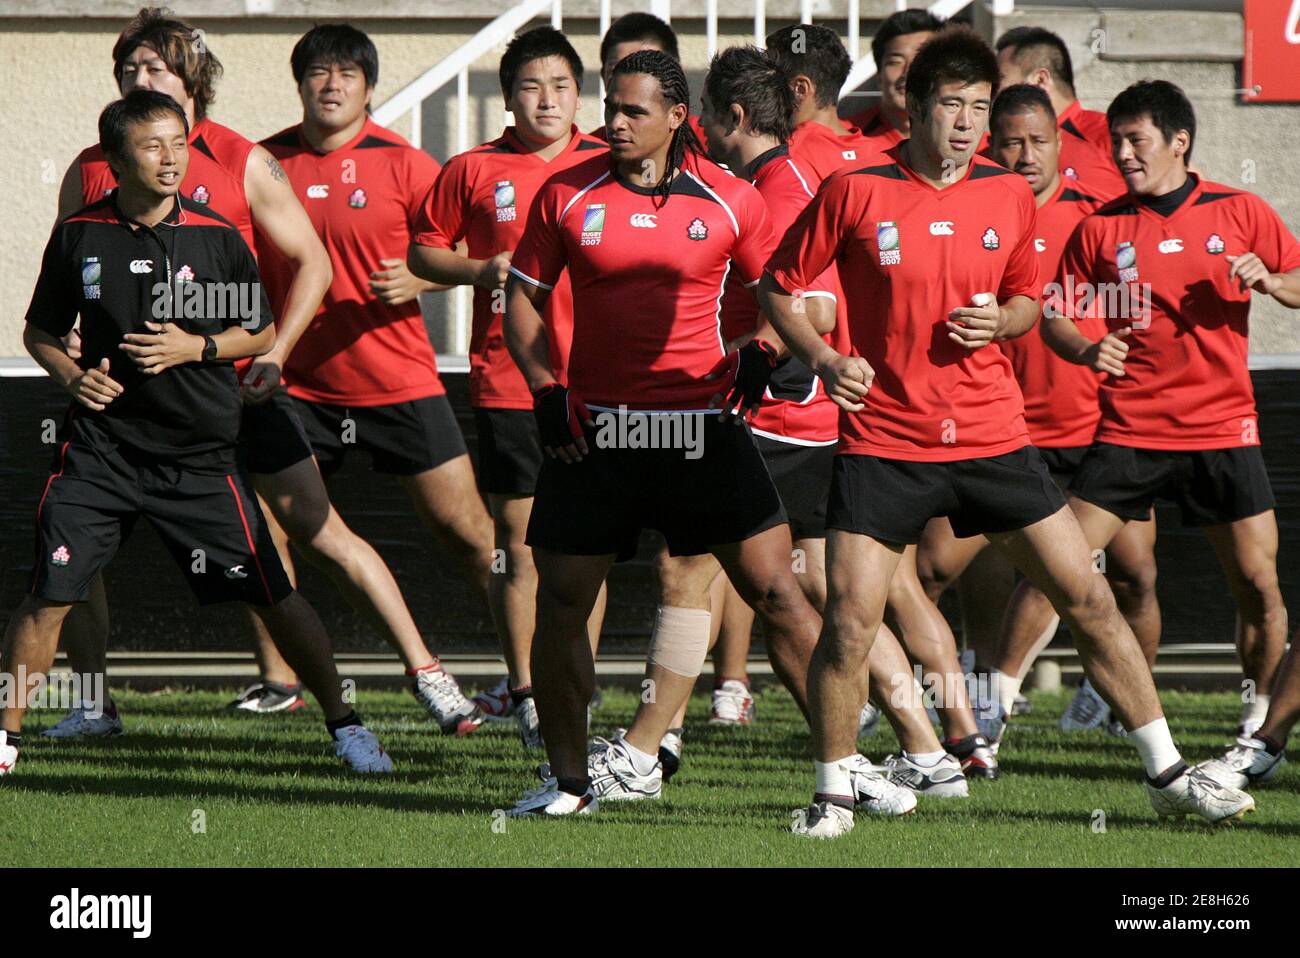 Japan's rugby team players run during a training session at stadium Michel Bendichou in Colomiers, southwestern France, September 14, 2007. Japan plays in Pool B with Australia, Wales, Fiji and Canada in the Rugby World Cup 2007 REUTERS/Jean-Philippe Arles (FRANCE) Stock Photo